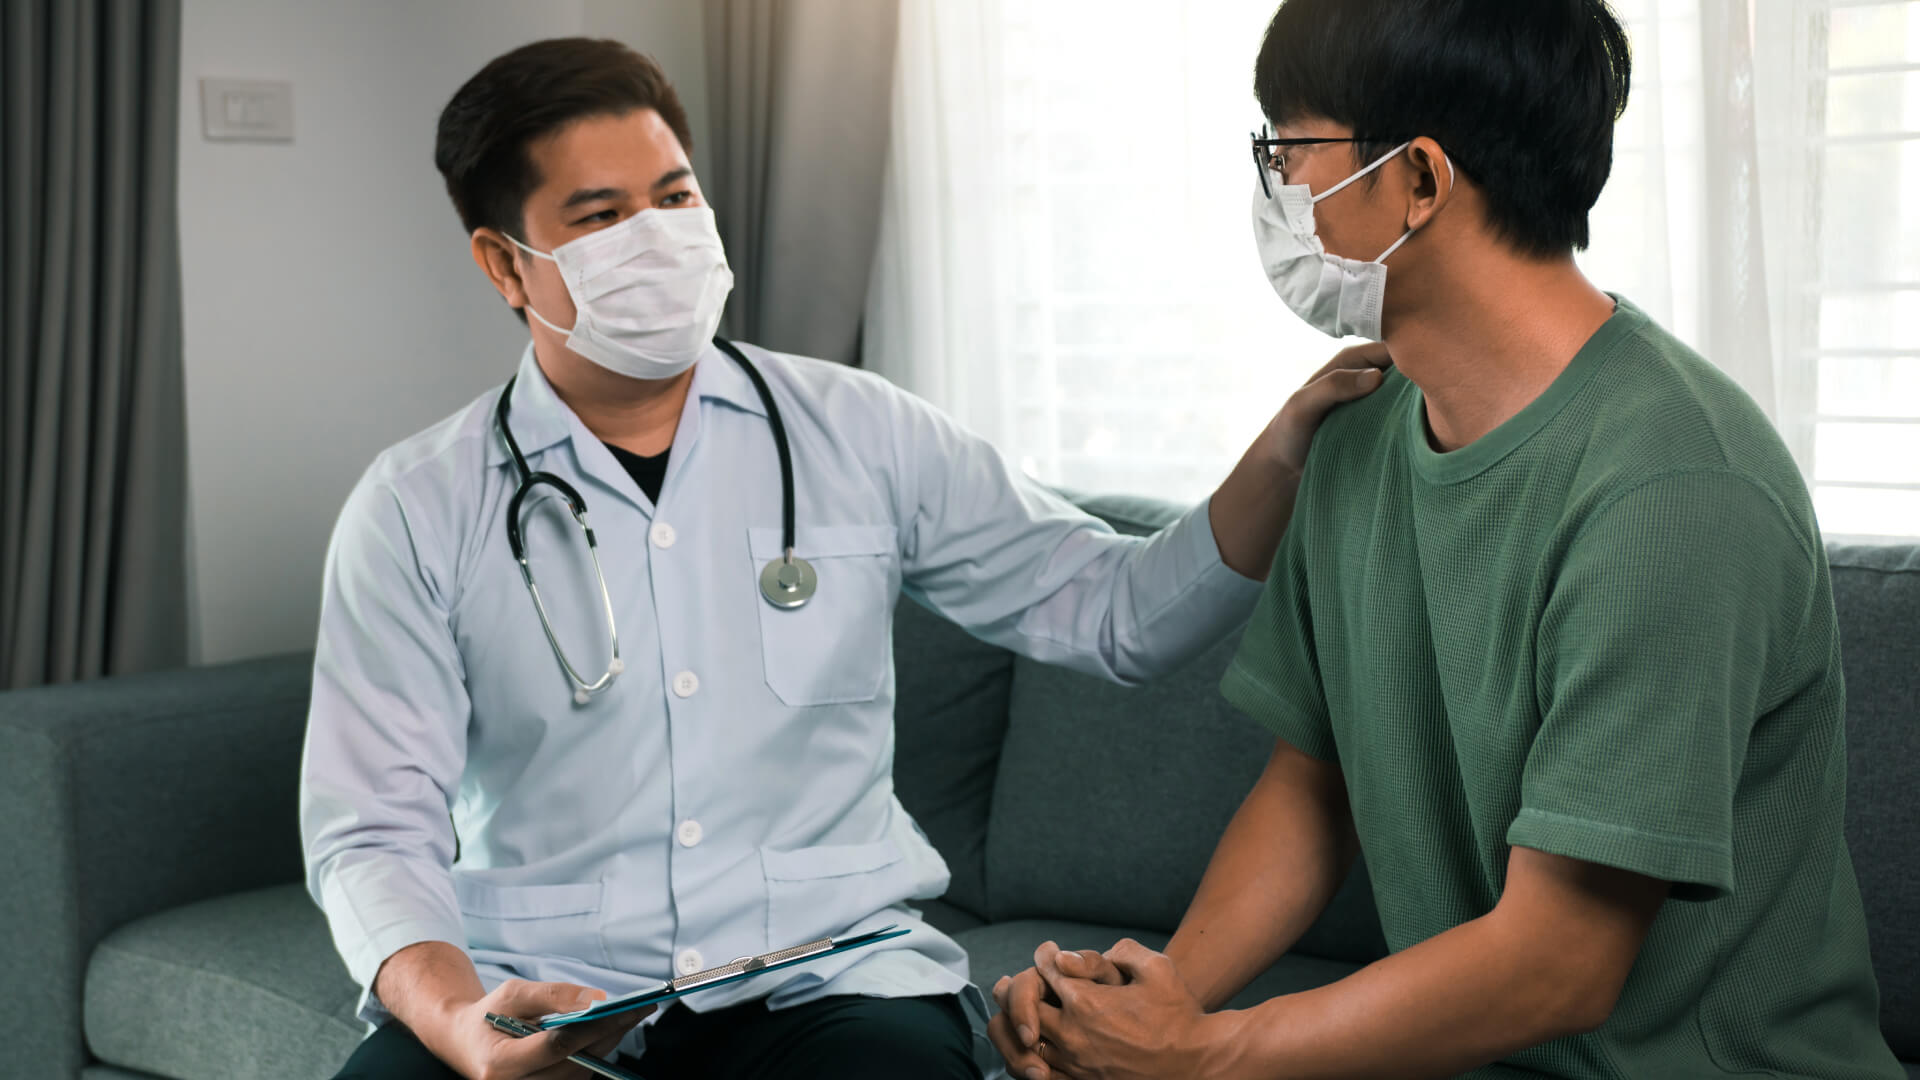 Doctor in a face mask with a stethoscope comforting a patient, also in a mask, during a consultation in a home setting, emphasizing personal care in healthcare.